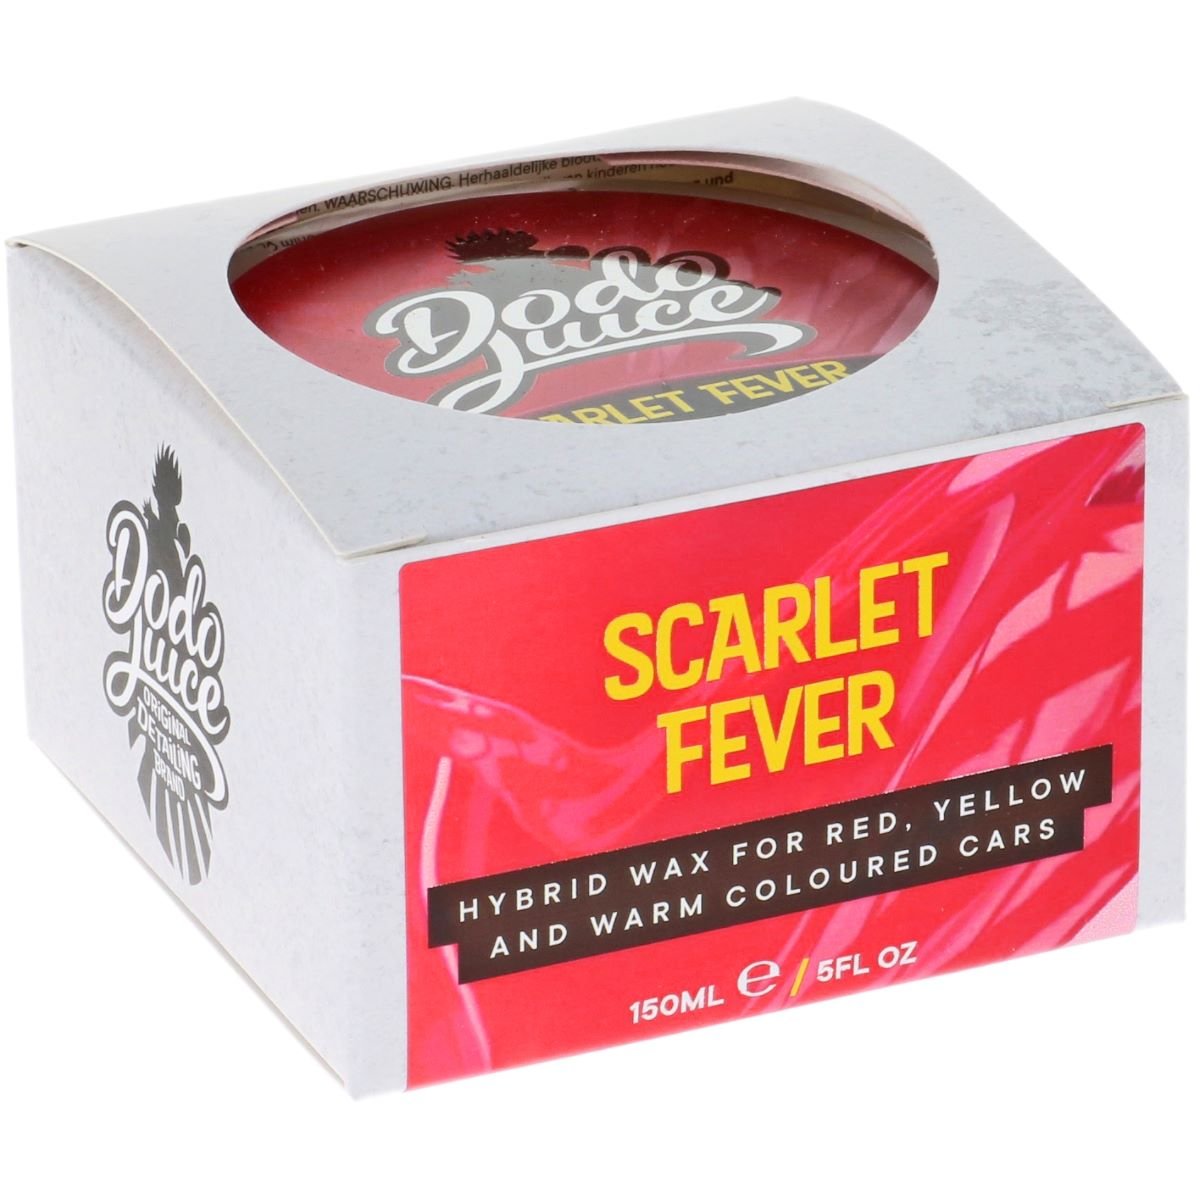 Scarlet Fever hybrid wax for warm coloured cars - 150ml